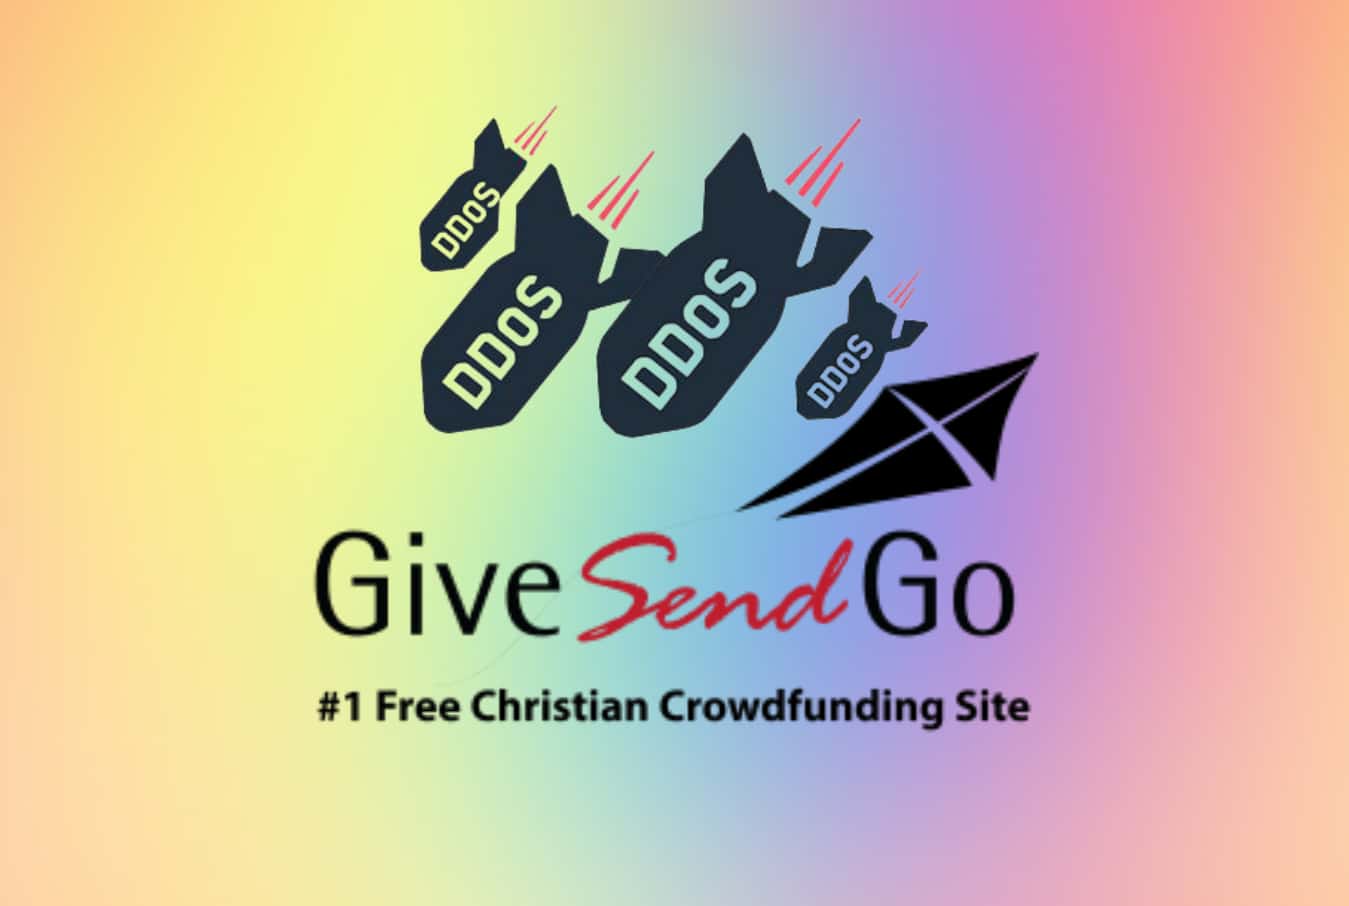 Christian crowdfunding site GiveSendGo hit by DDoS attack